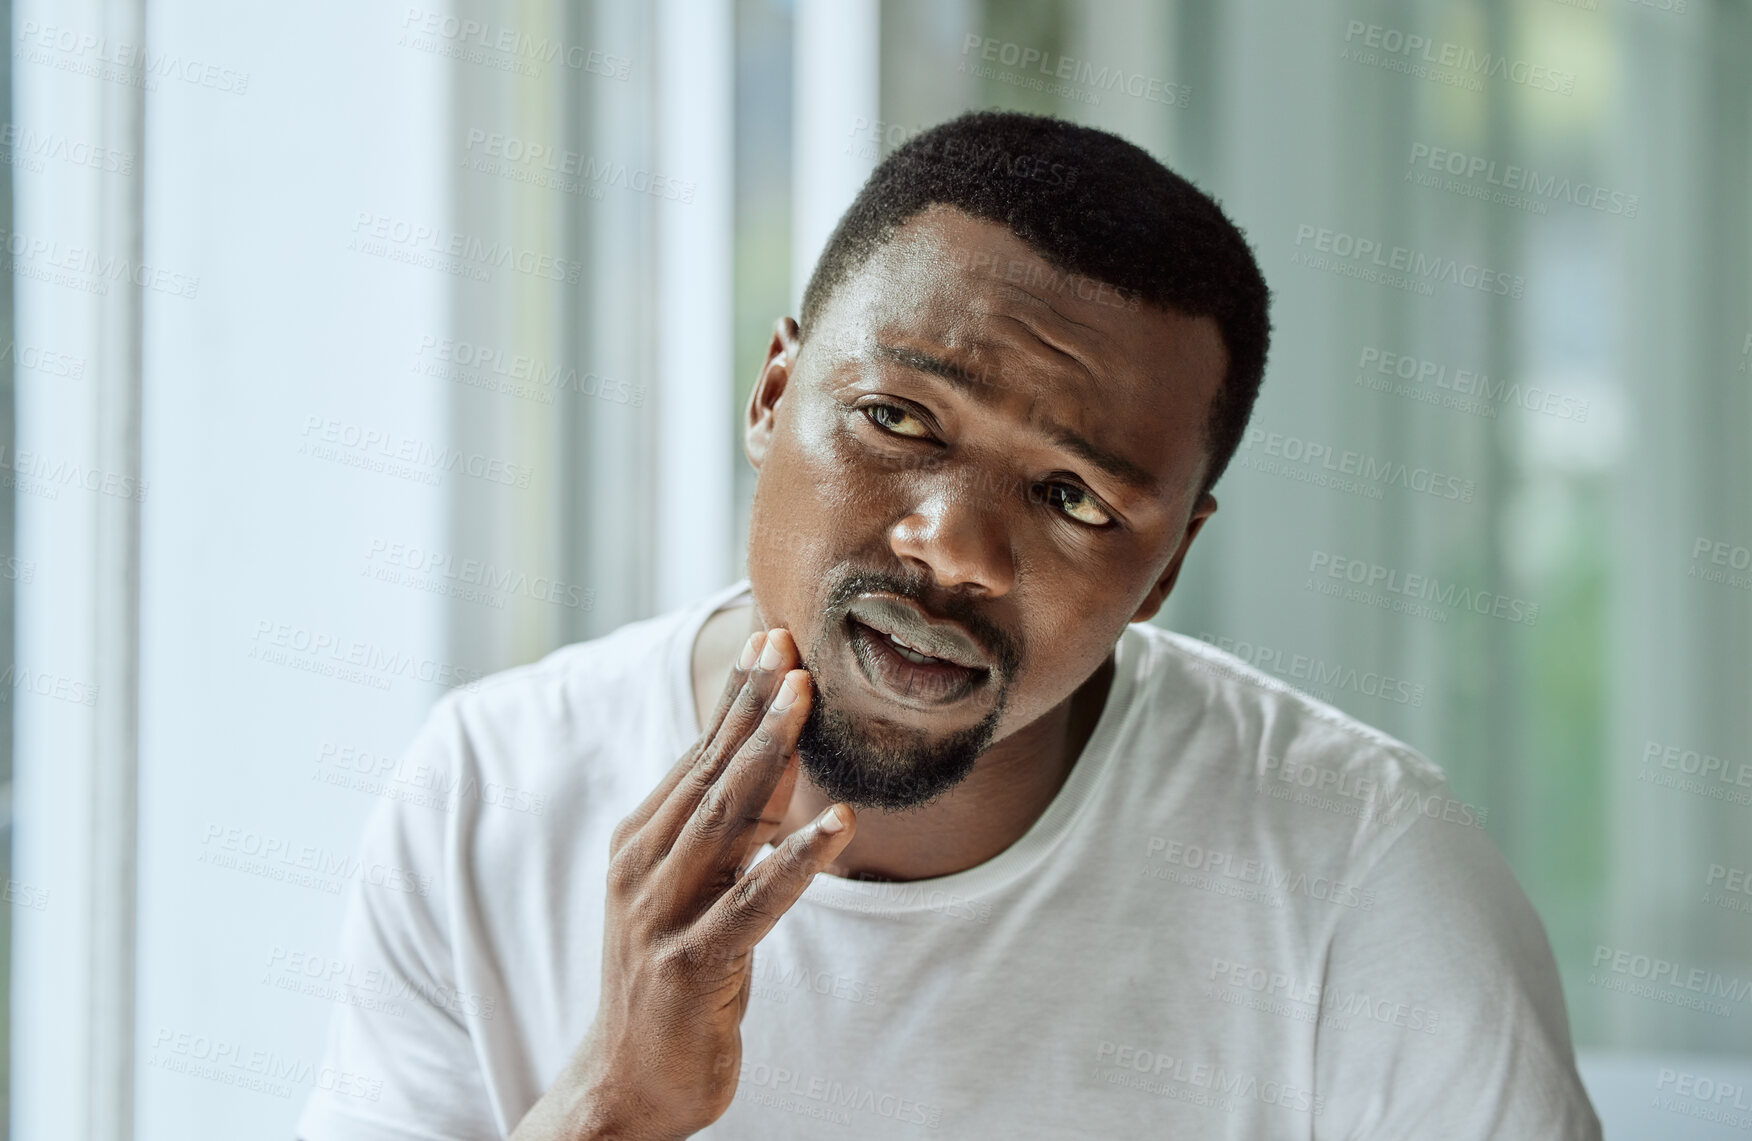 Buy stock photo Sad, aesthetic and anxiety of black man with acne confused with face analysis in home bathroom mirror. Unhappy skincare man checking pimple problem in reflection with morning grooming routine.

